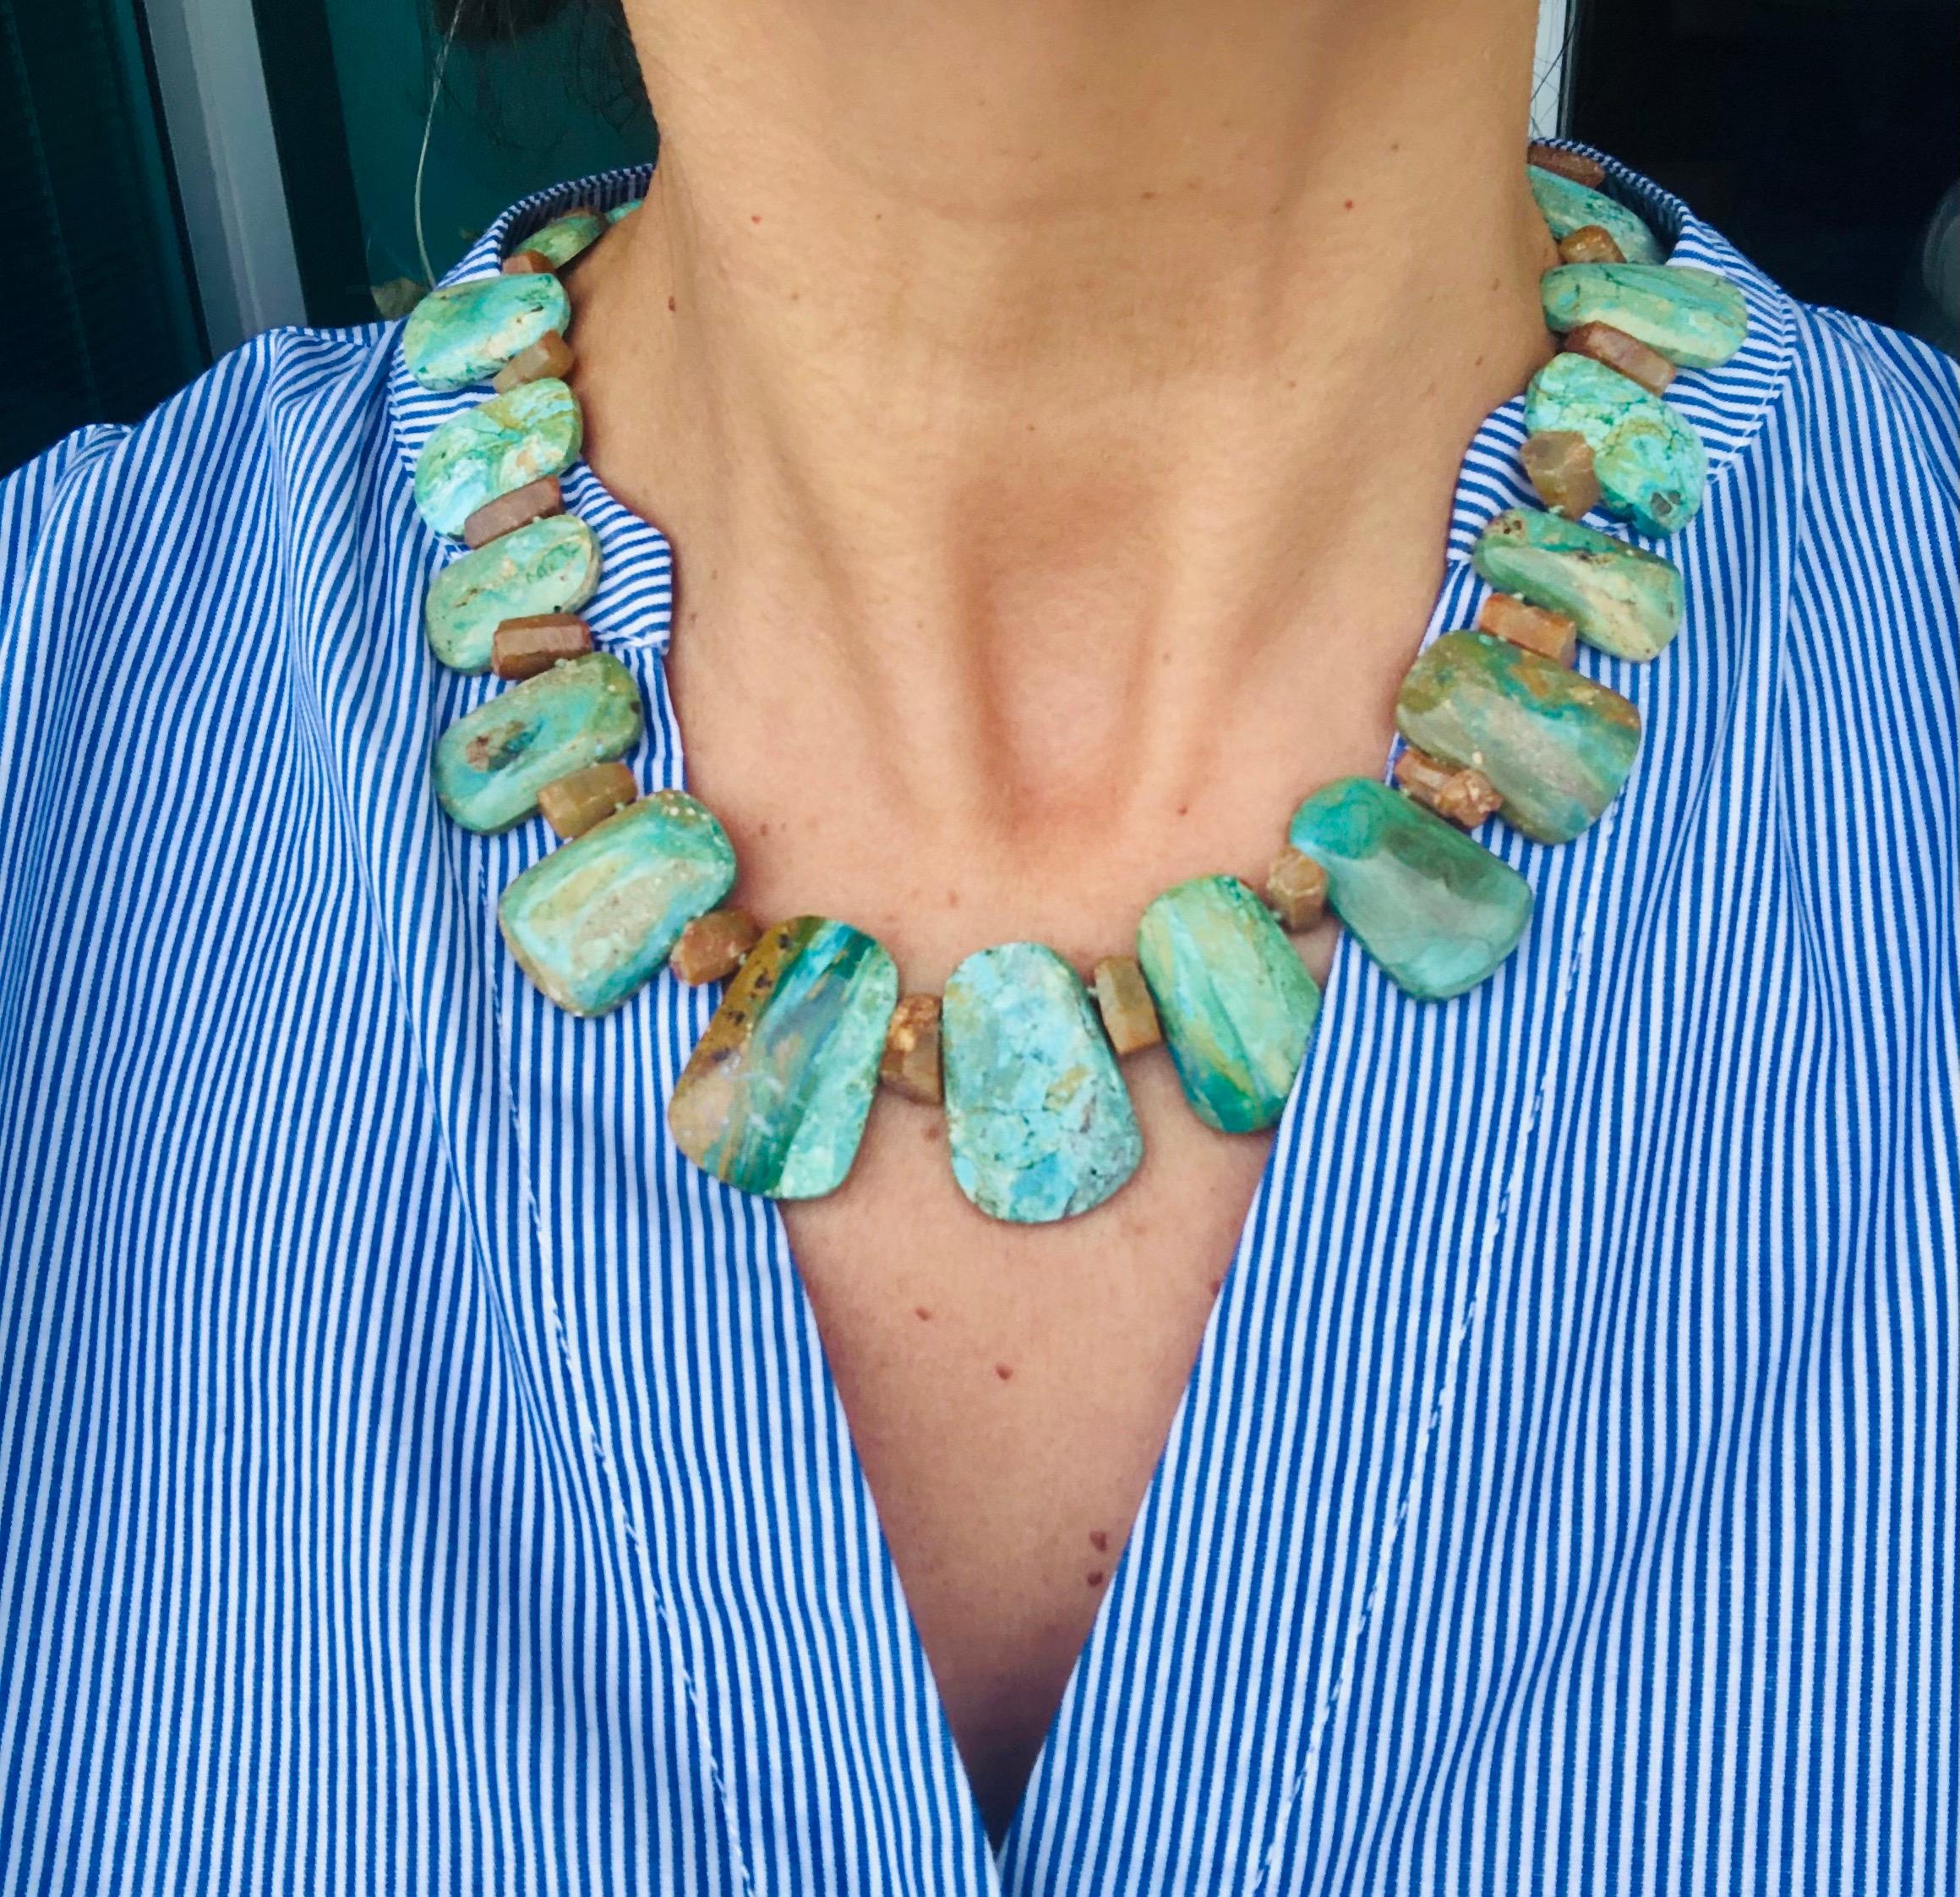 Exquisite Gem Silica Necklace: Rare Beauty

Indulge in the unparalleled allure of gem silica, the rarest of blue-green gemstones, coveted for its association with copper deposits and its stunning hue. Often found alongside quartz, chalcedony,